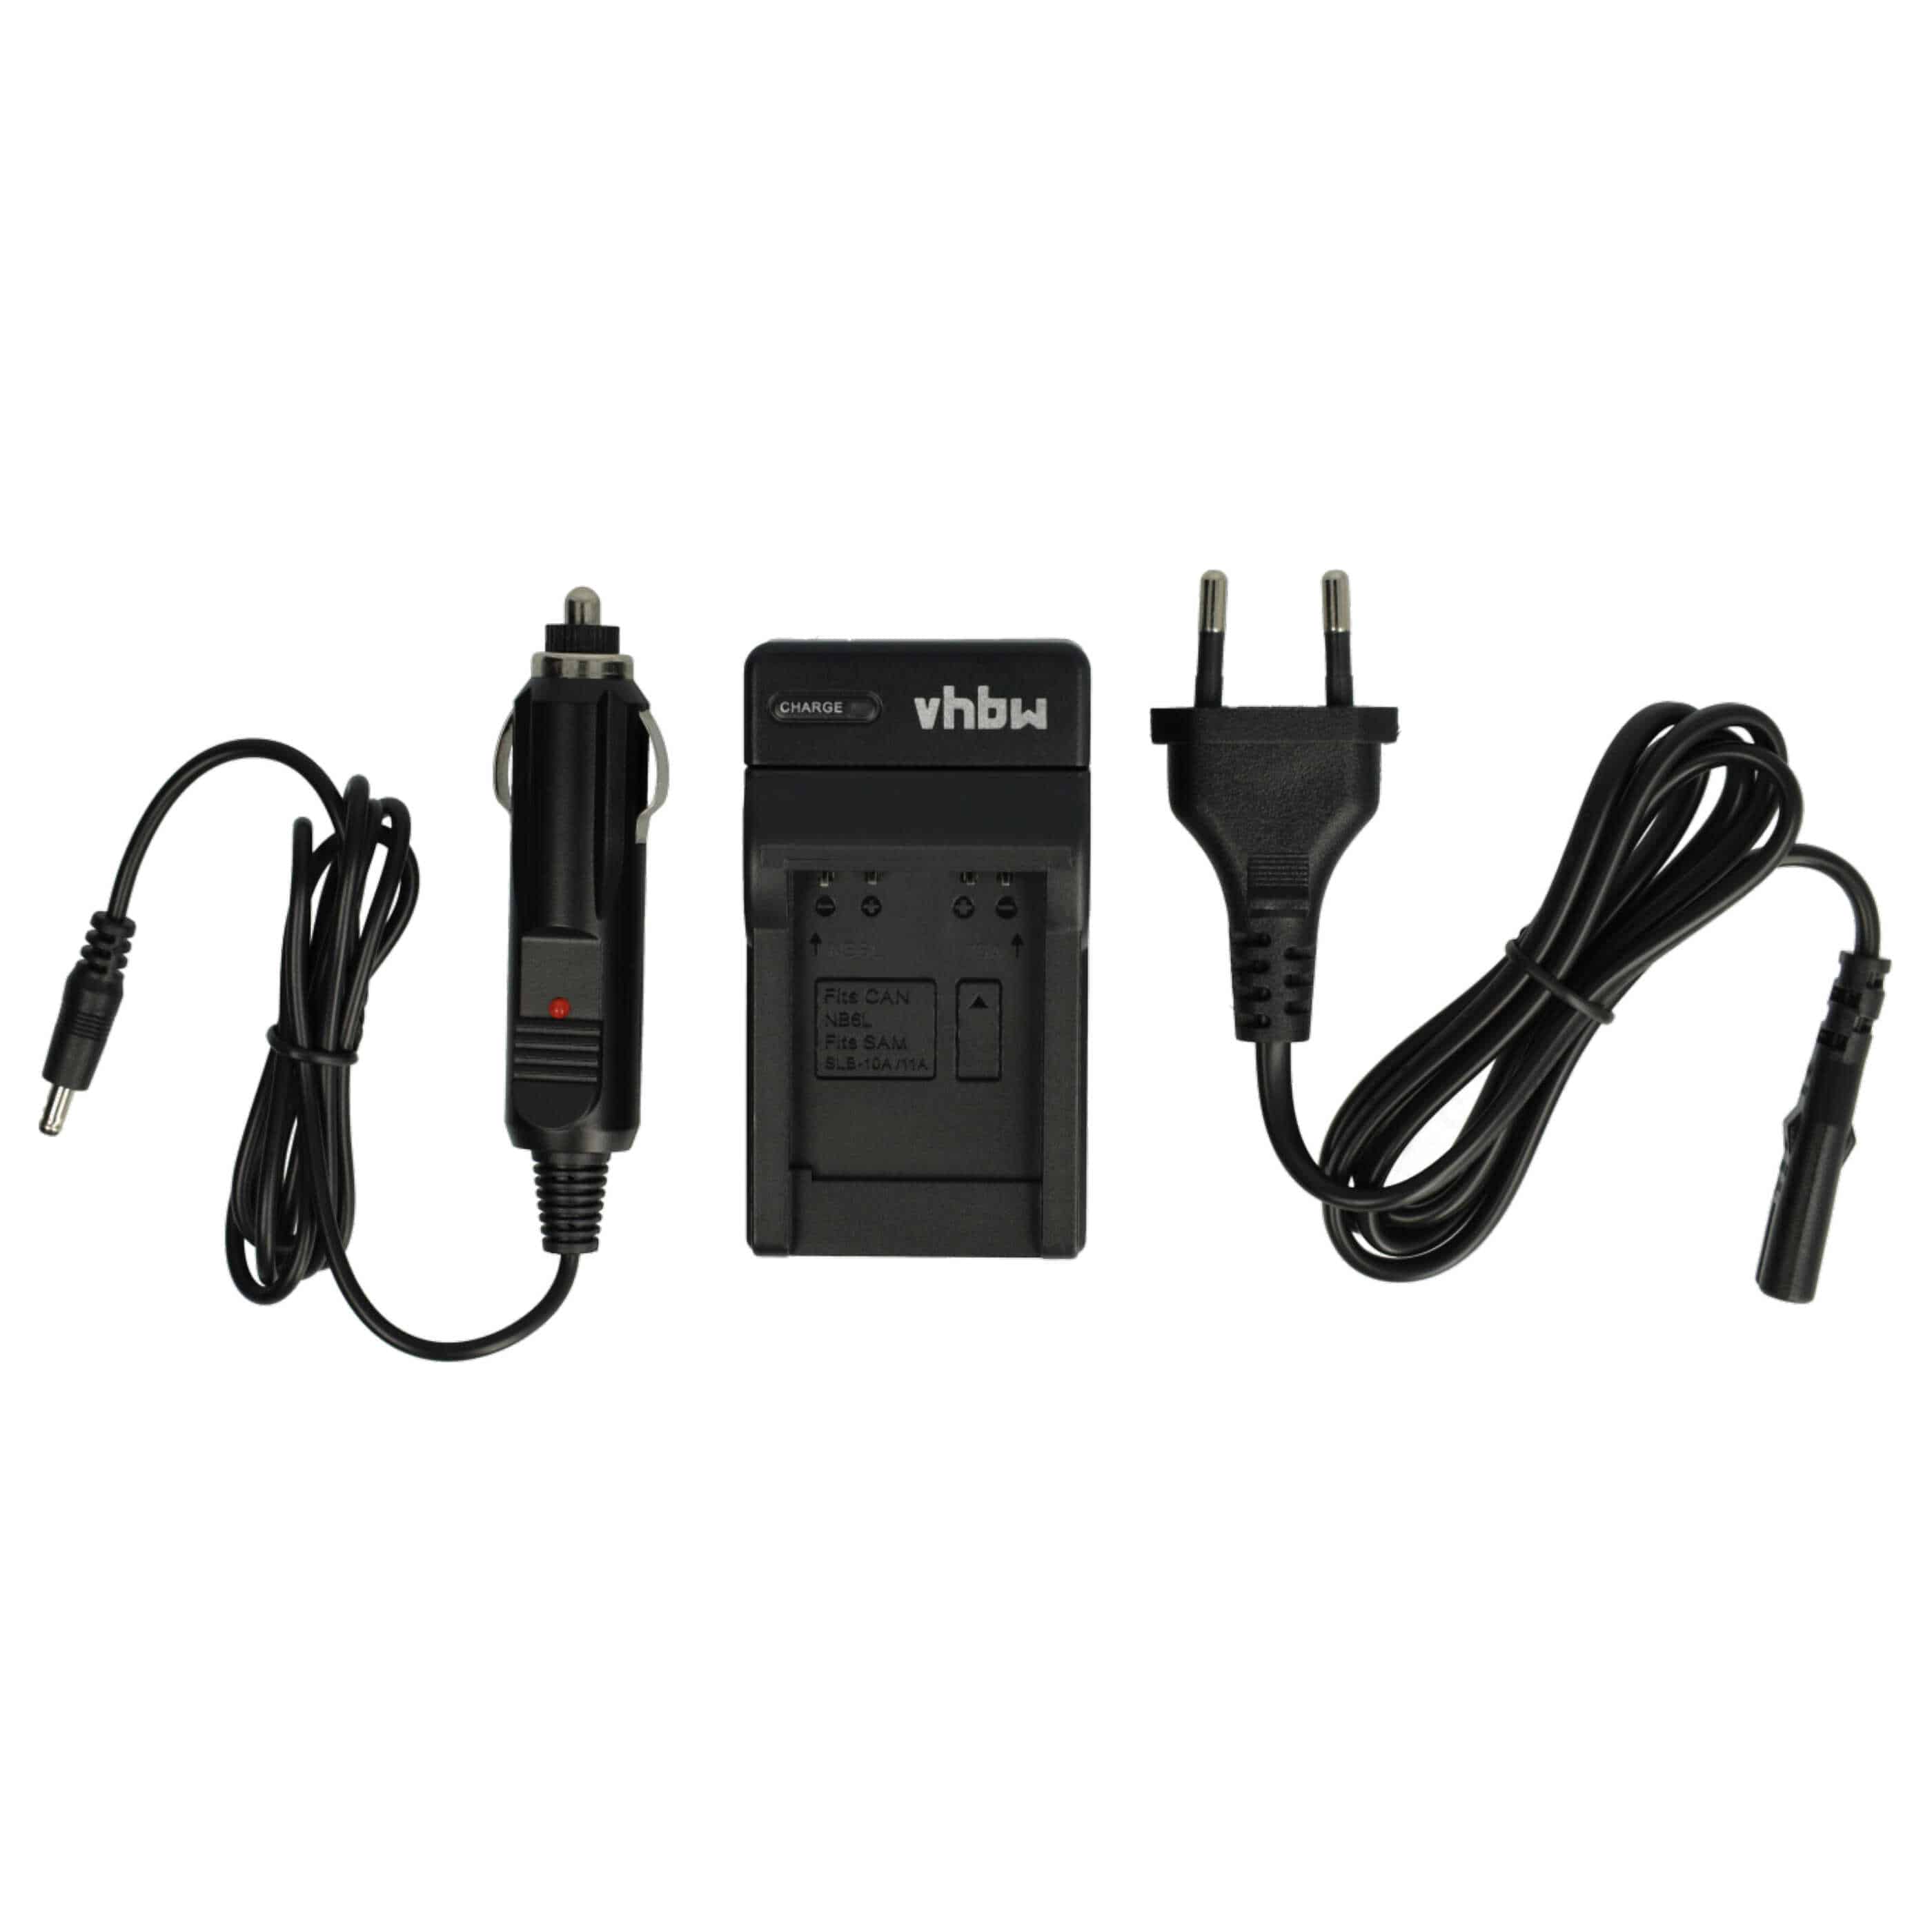 Battery Charger suitable for Canon NB-6LHCB-2LYE Camera etc. - 0.6 A, 4.2 V